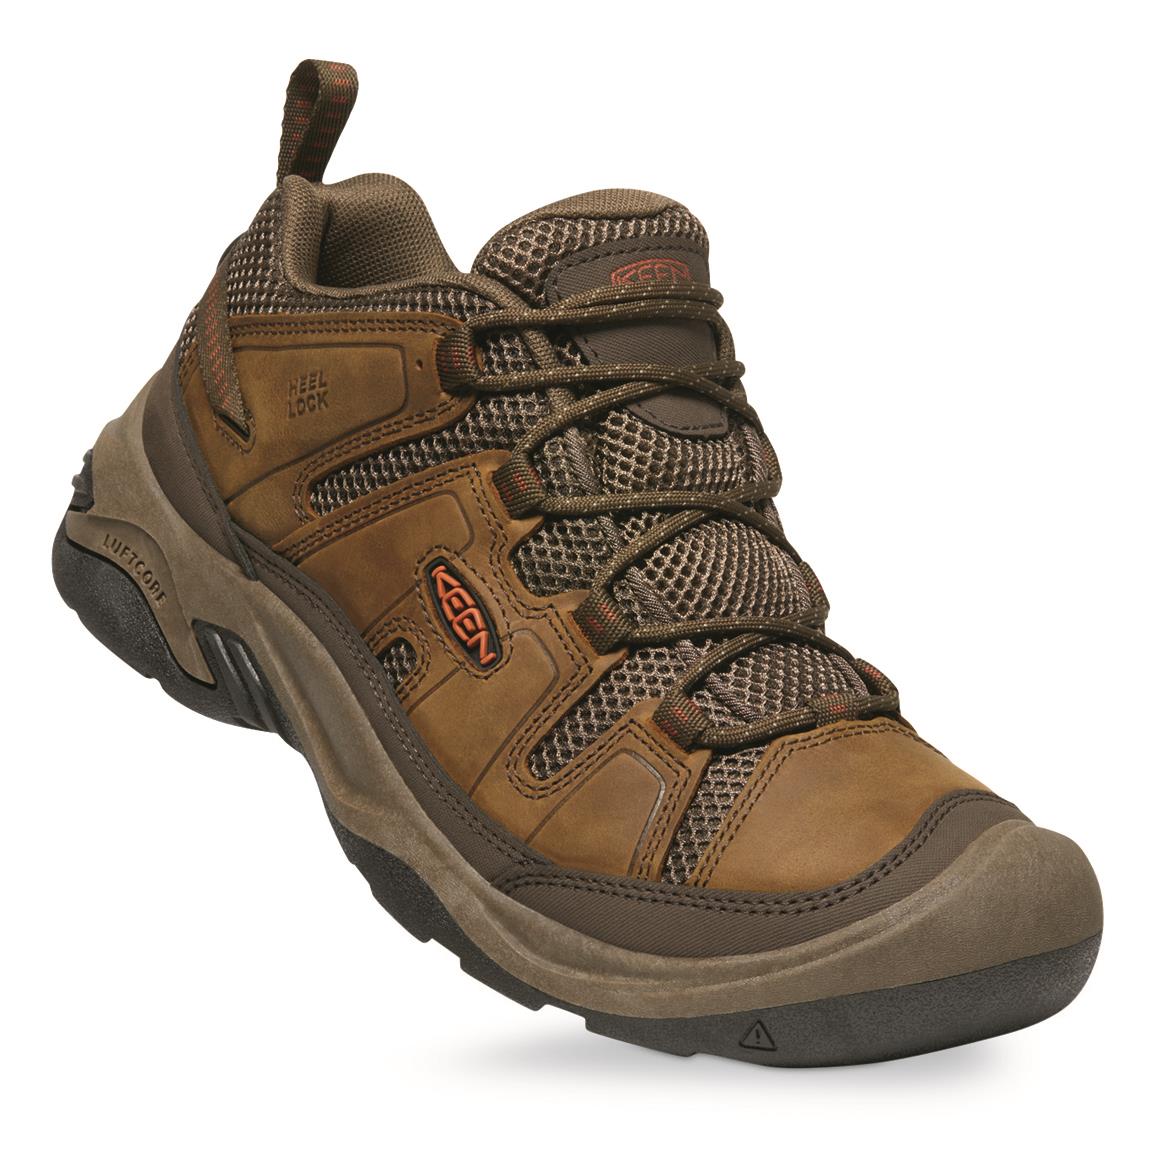 KEEN Men's Circadia Vent Hiking Shoes, Bison/potters Clay